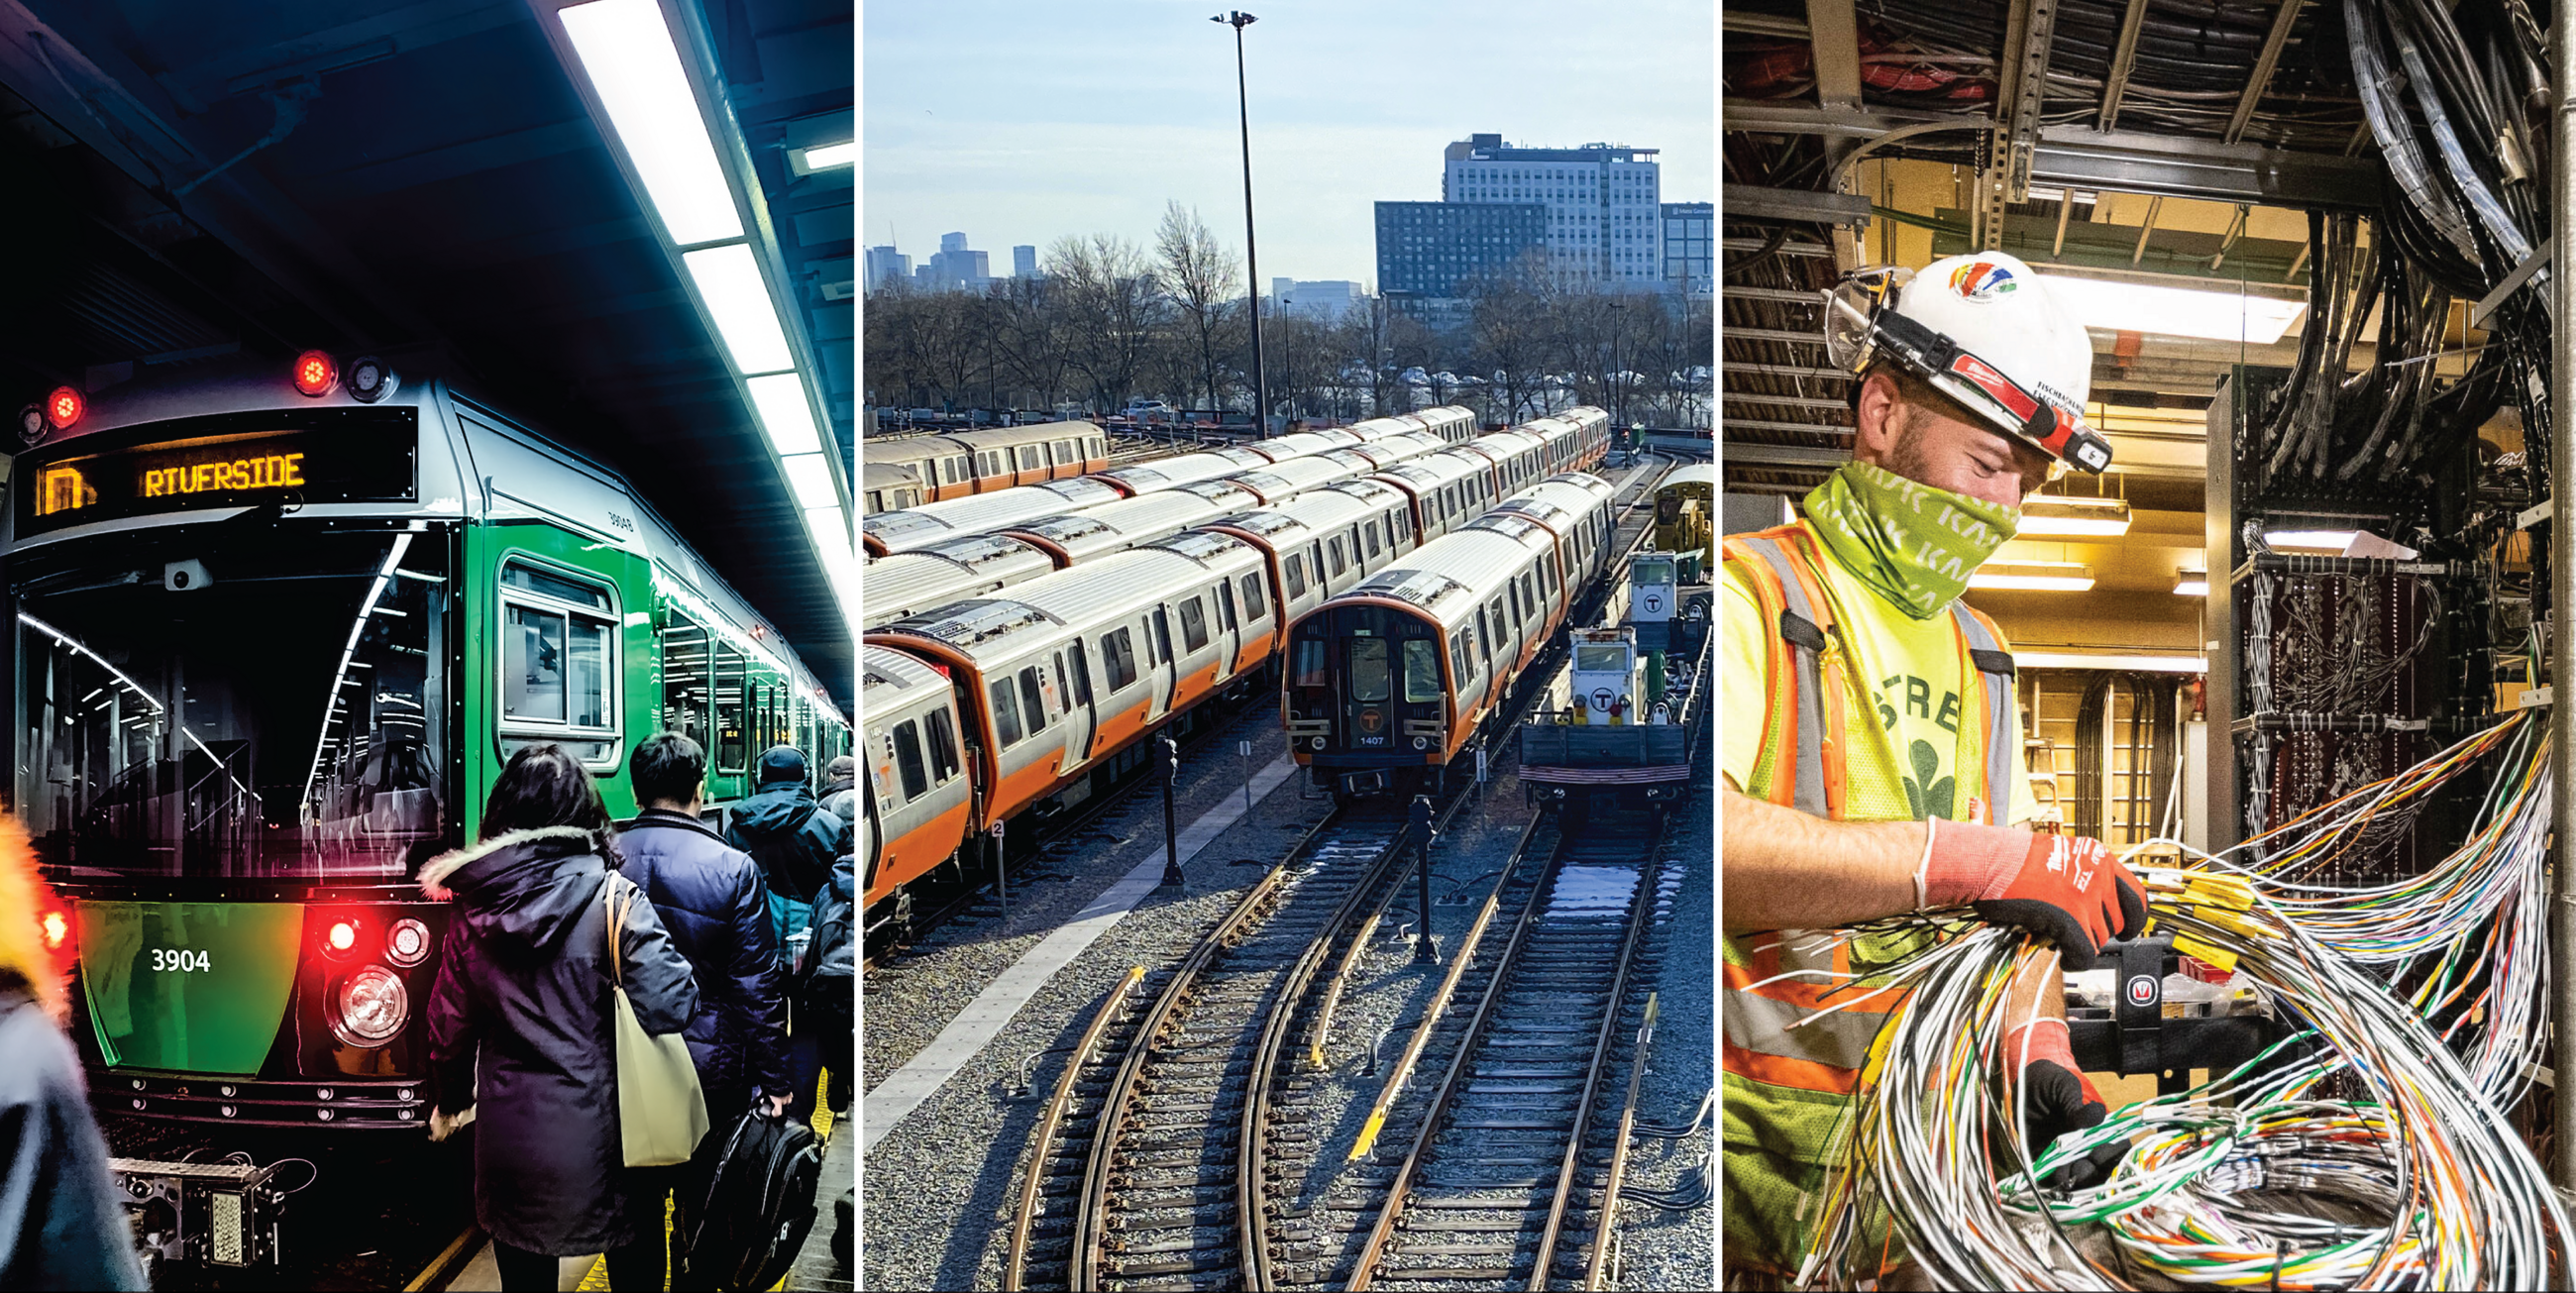 three photos side by side: green line train with riverside headway sign, orange line trains in yard, and crew member in reflective vest and hard hat holding bundle of wires